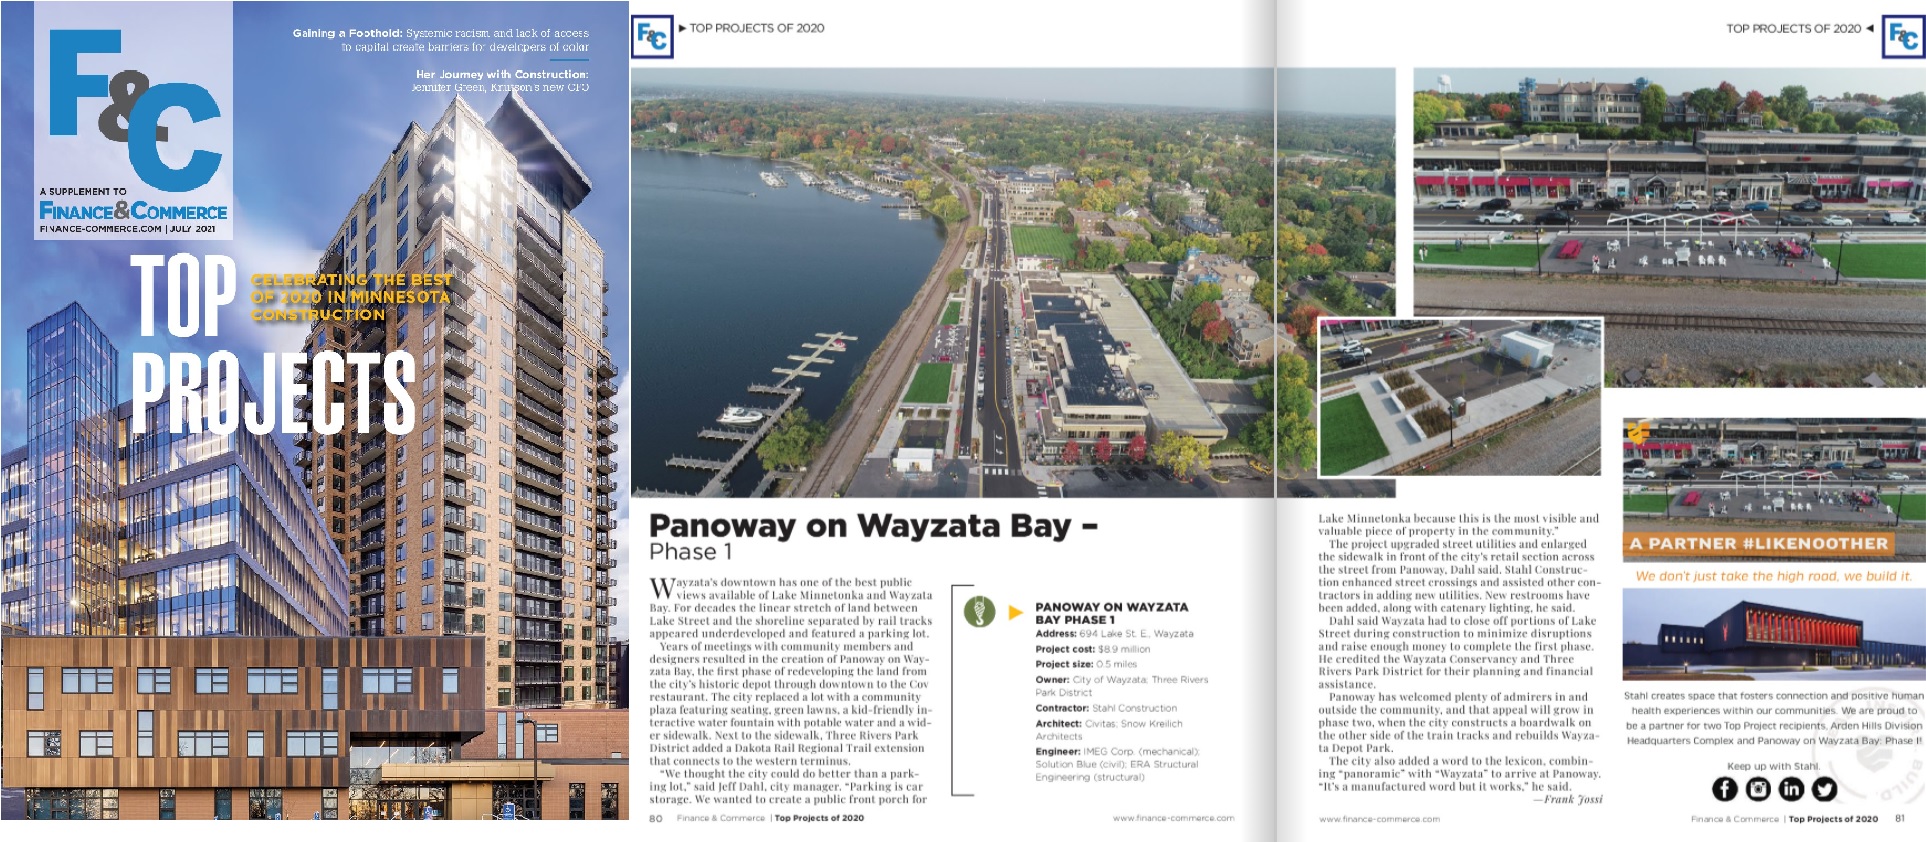 Panoway on Wayzata Bay was named a Top Project of 2020 in Finance & Commerce Magazine!